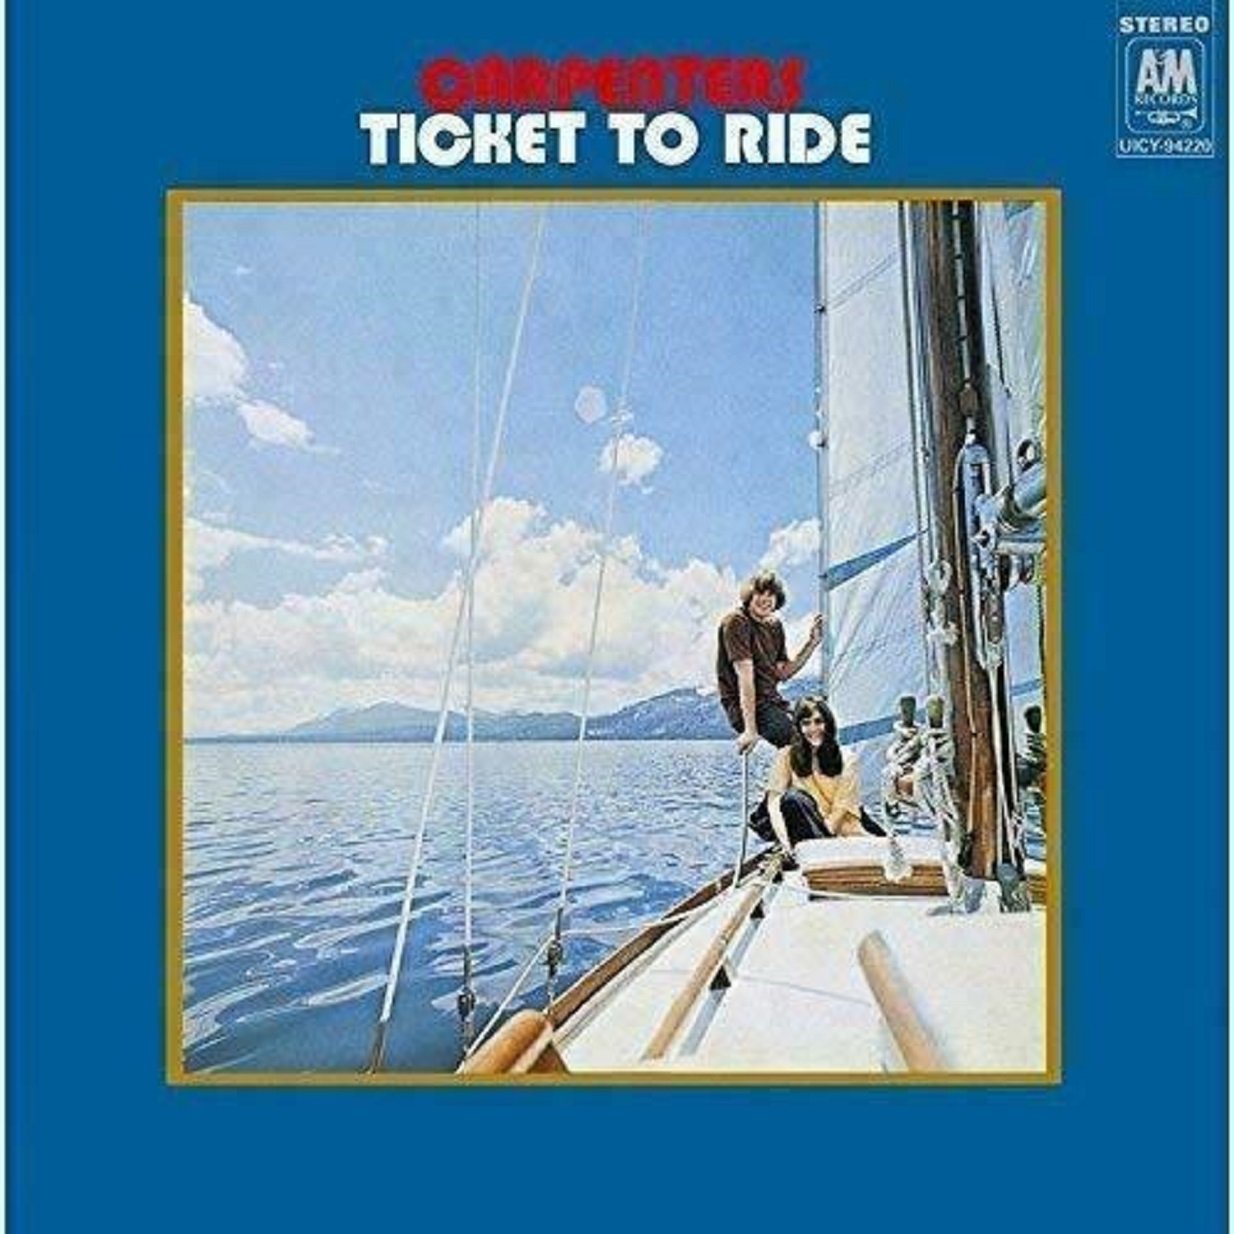 carpenters ticket to ride songs